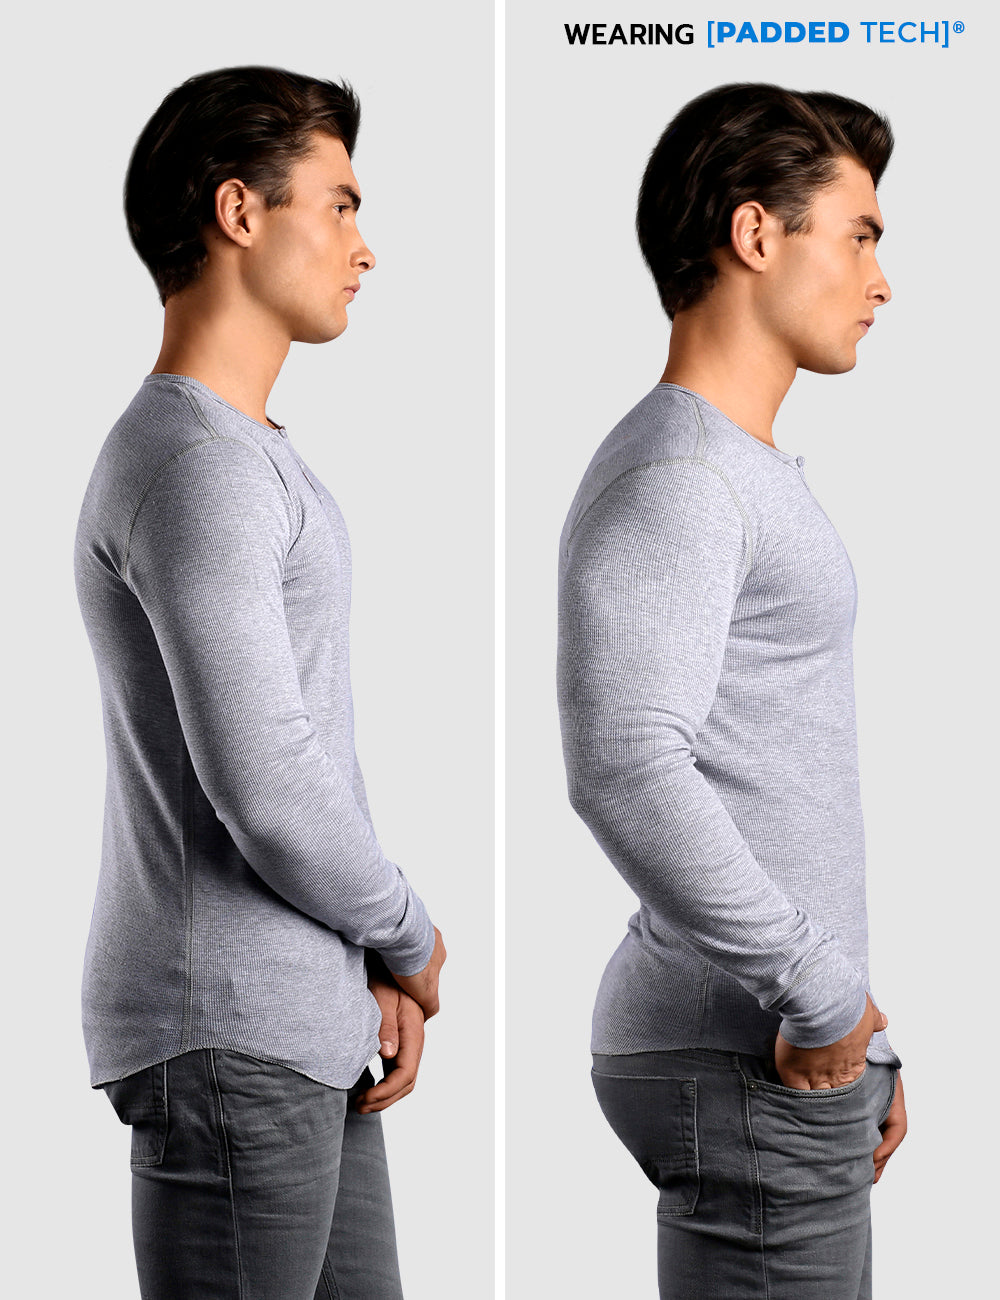 Men Fake Muscle Chest Underwear Padded Shirt Enhancers Male